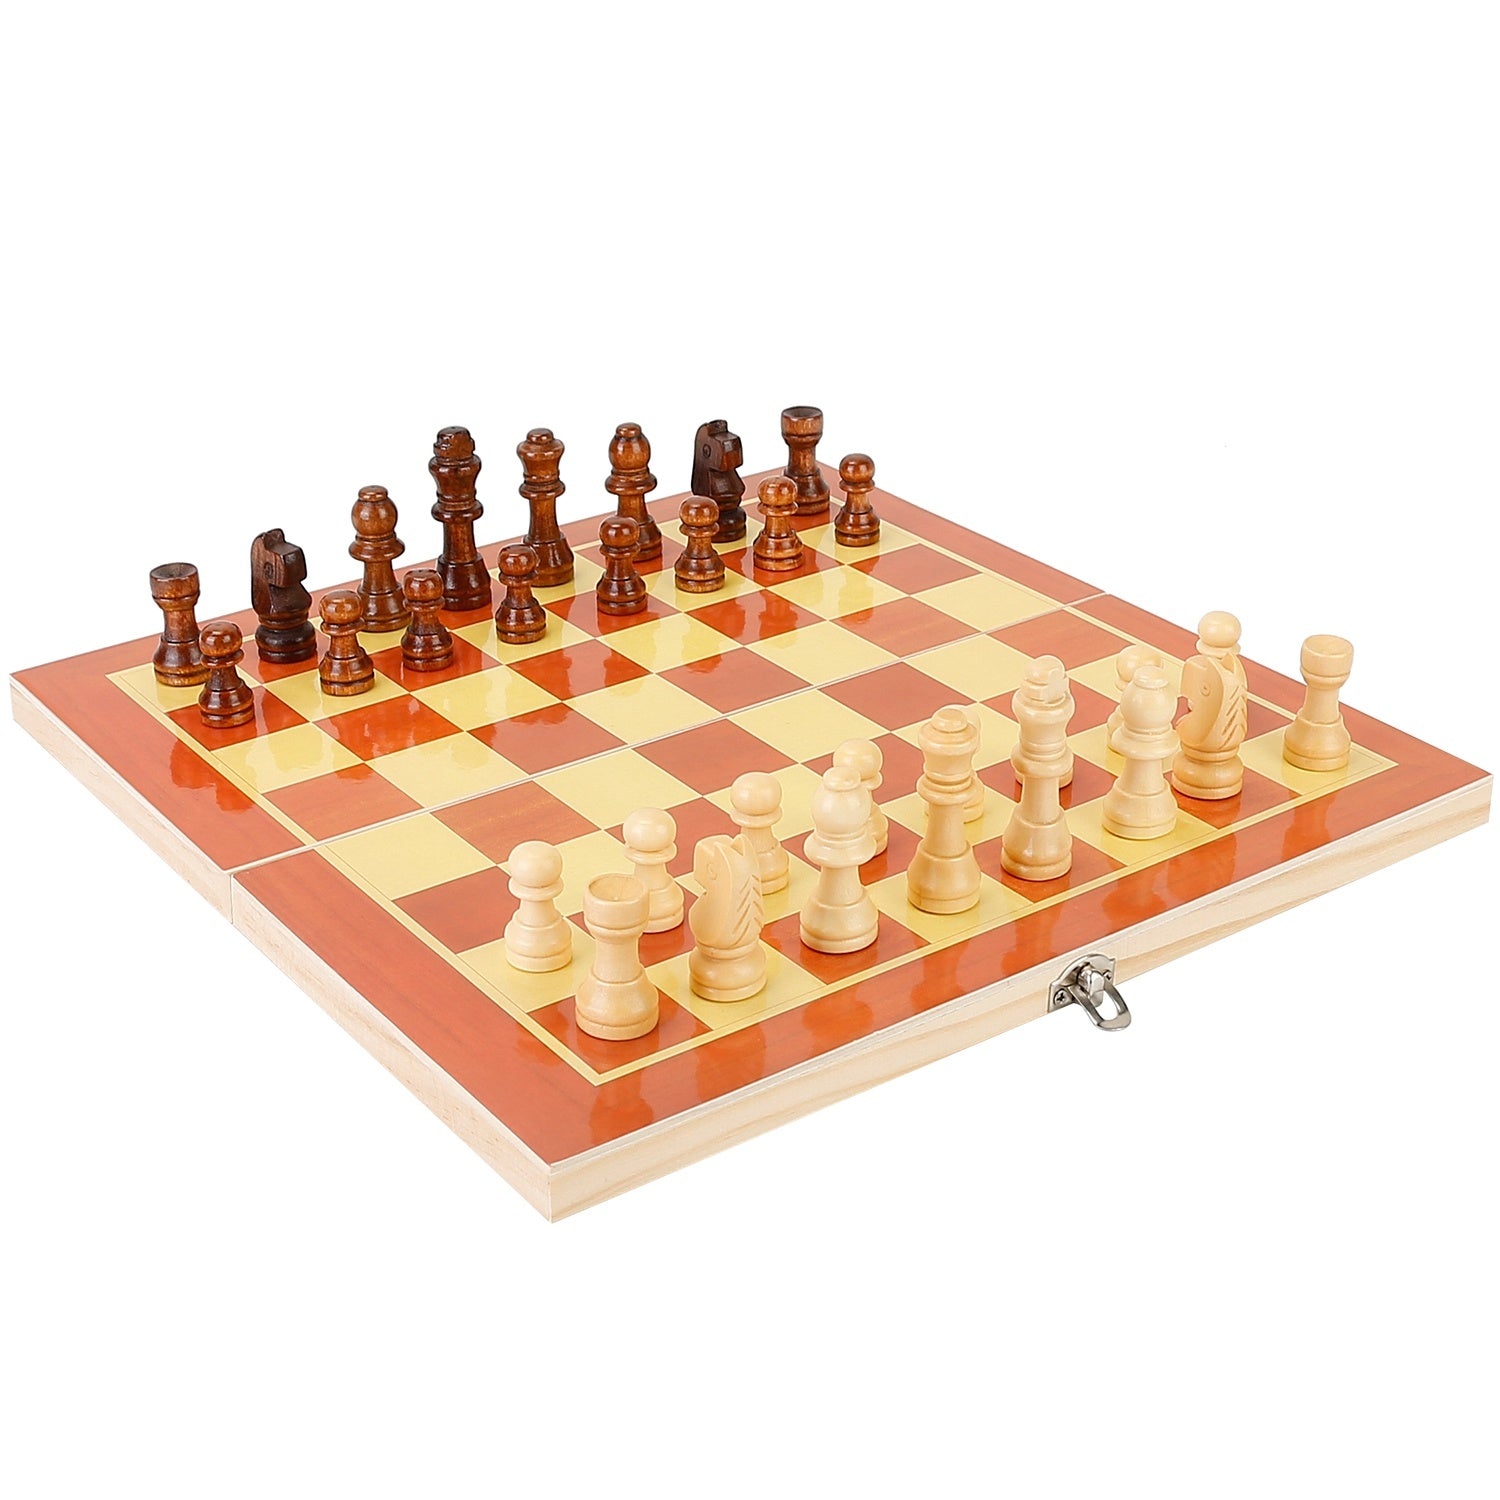 A Folding Board Game Set Portable Travel Wooden Chess Set with Wooden Crafted Pieces Chessmen Storage Box on a white background.